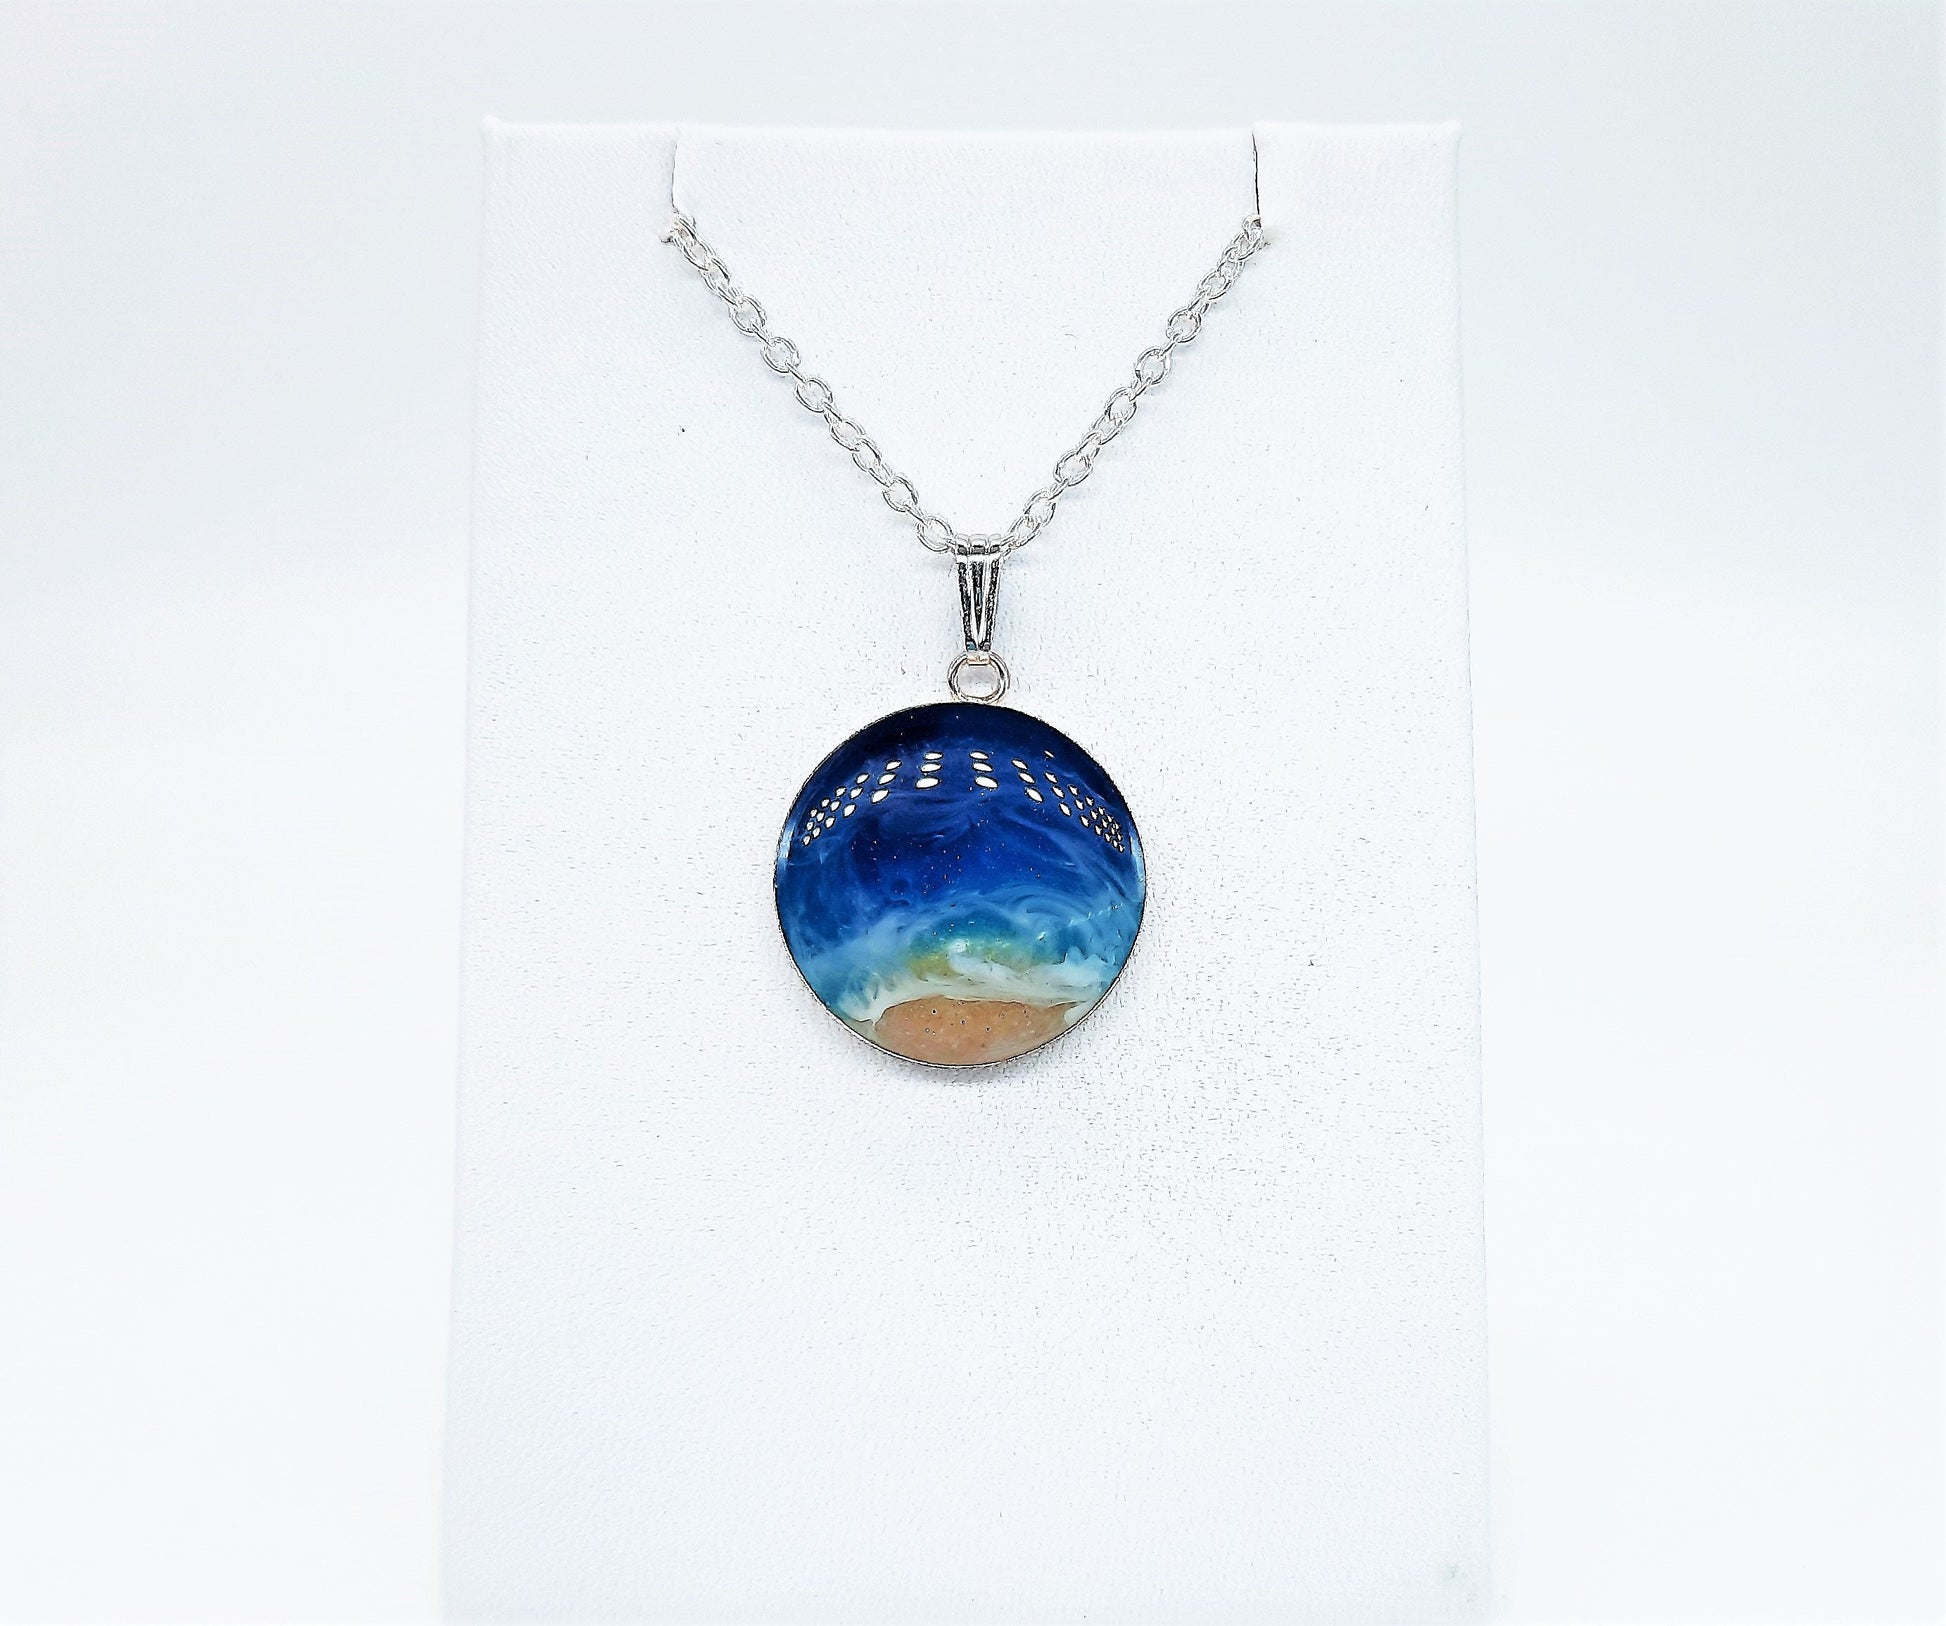 Handmade 925 Sterling Silver Resin Waves Ocean Pendant Necklace, Beach Scene, Made with Real Sand, Resin, and Mica - NOT A PHOTOGRAPH!